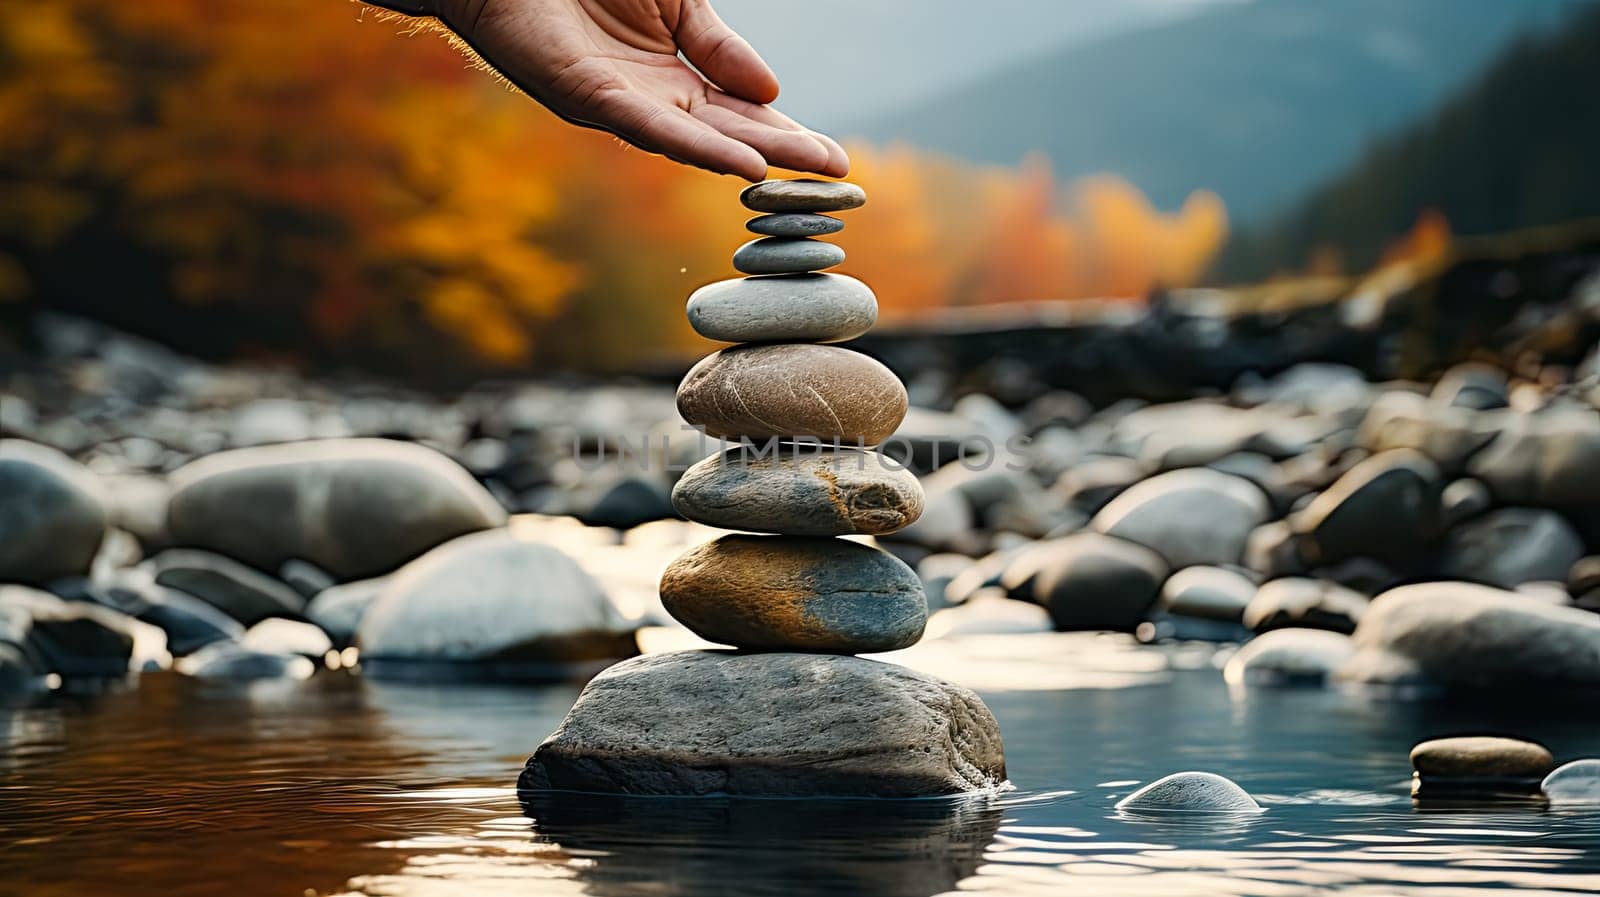 Witness the meditative artistry as a mans hand skillfully places stones one atop the other, creating a captivating balance. A tranquil and harmonious moment.